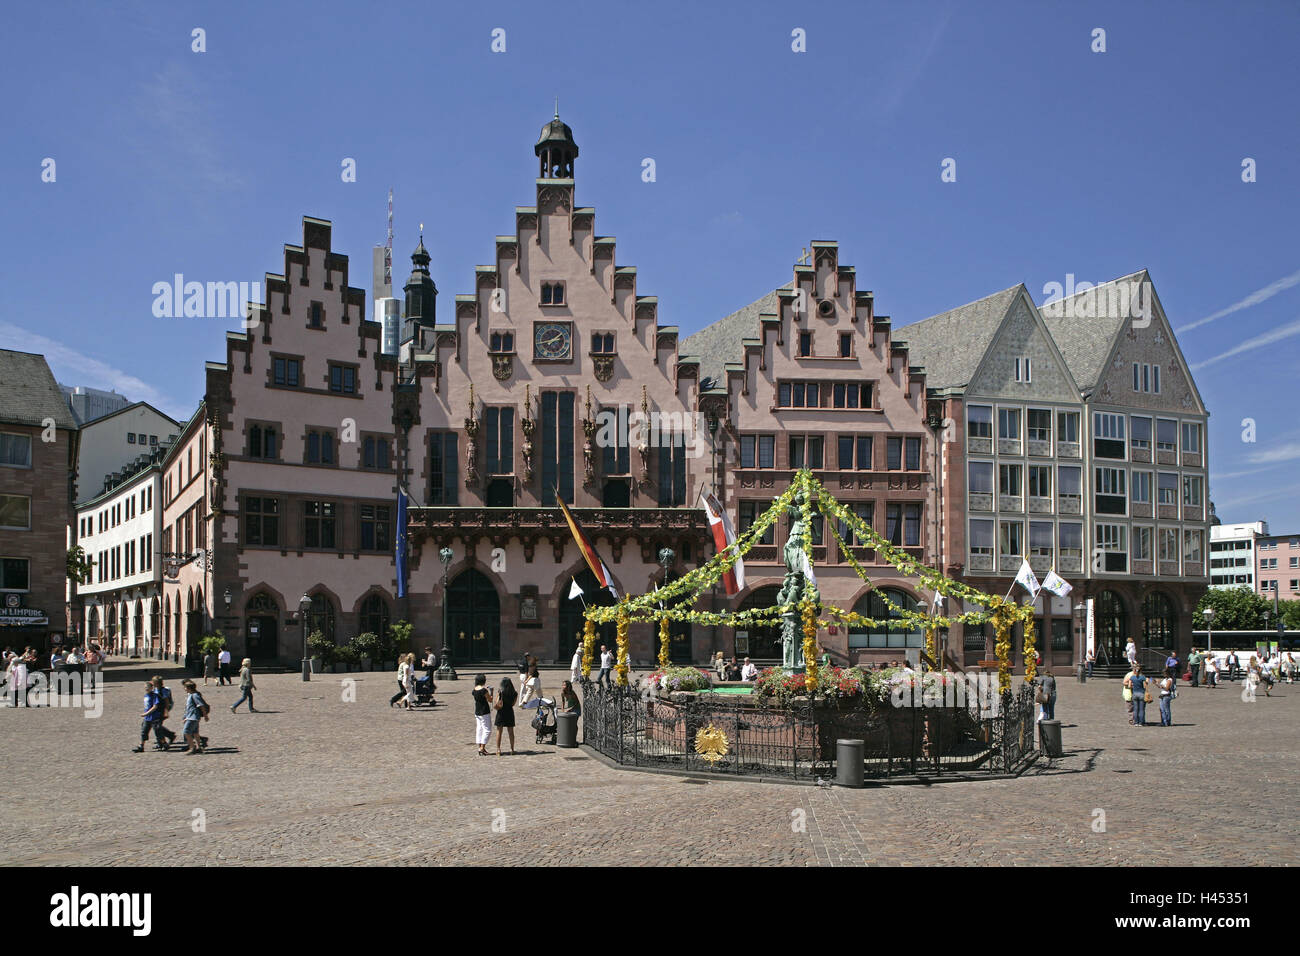 Germany, Hessen, Frankfurt on the Main, Old Town, city hall, Roman, justice well, decorated, town, city, metropolis, financial metropolis, architecture, houses, buildings, old, historically, gabled houses, wells, space, person, tourist, summer, outside, t Stock Photo